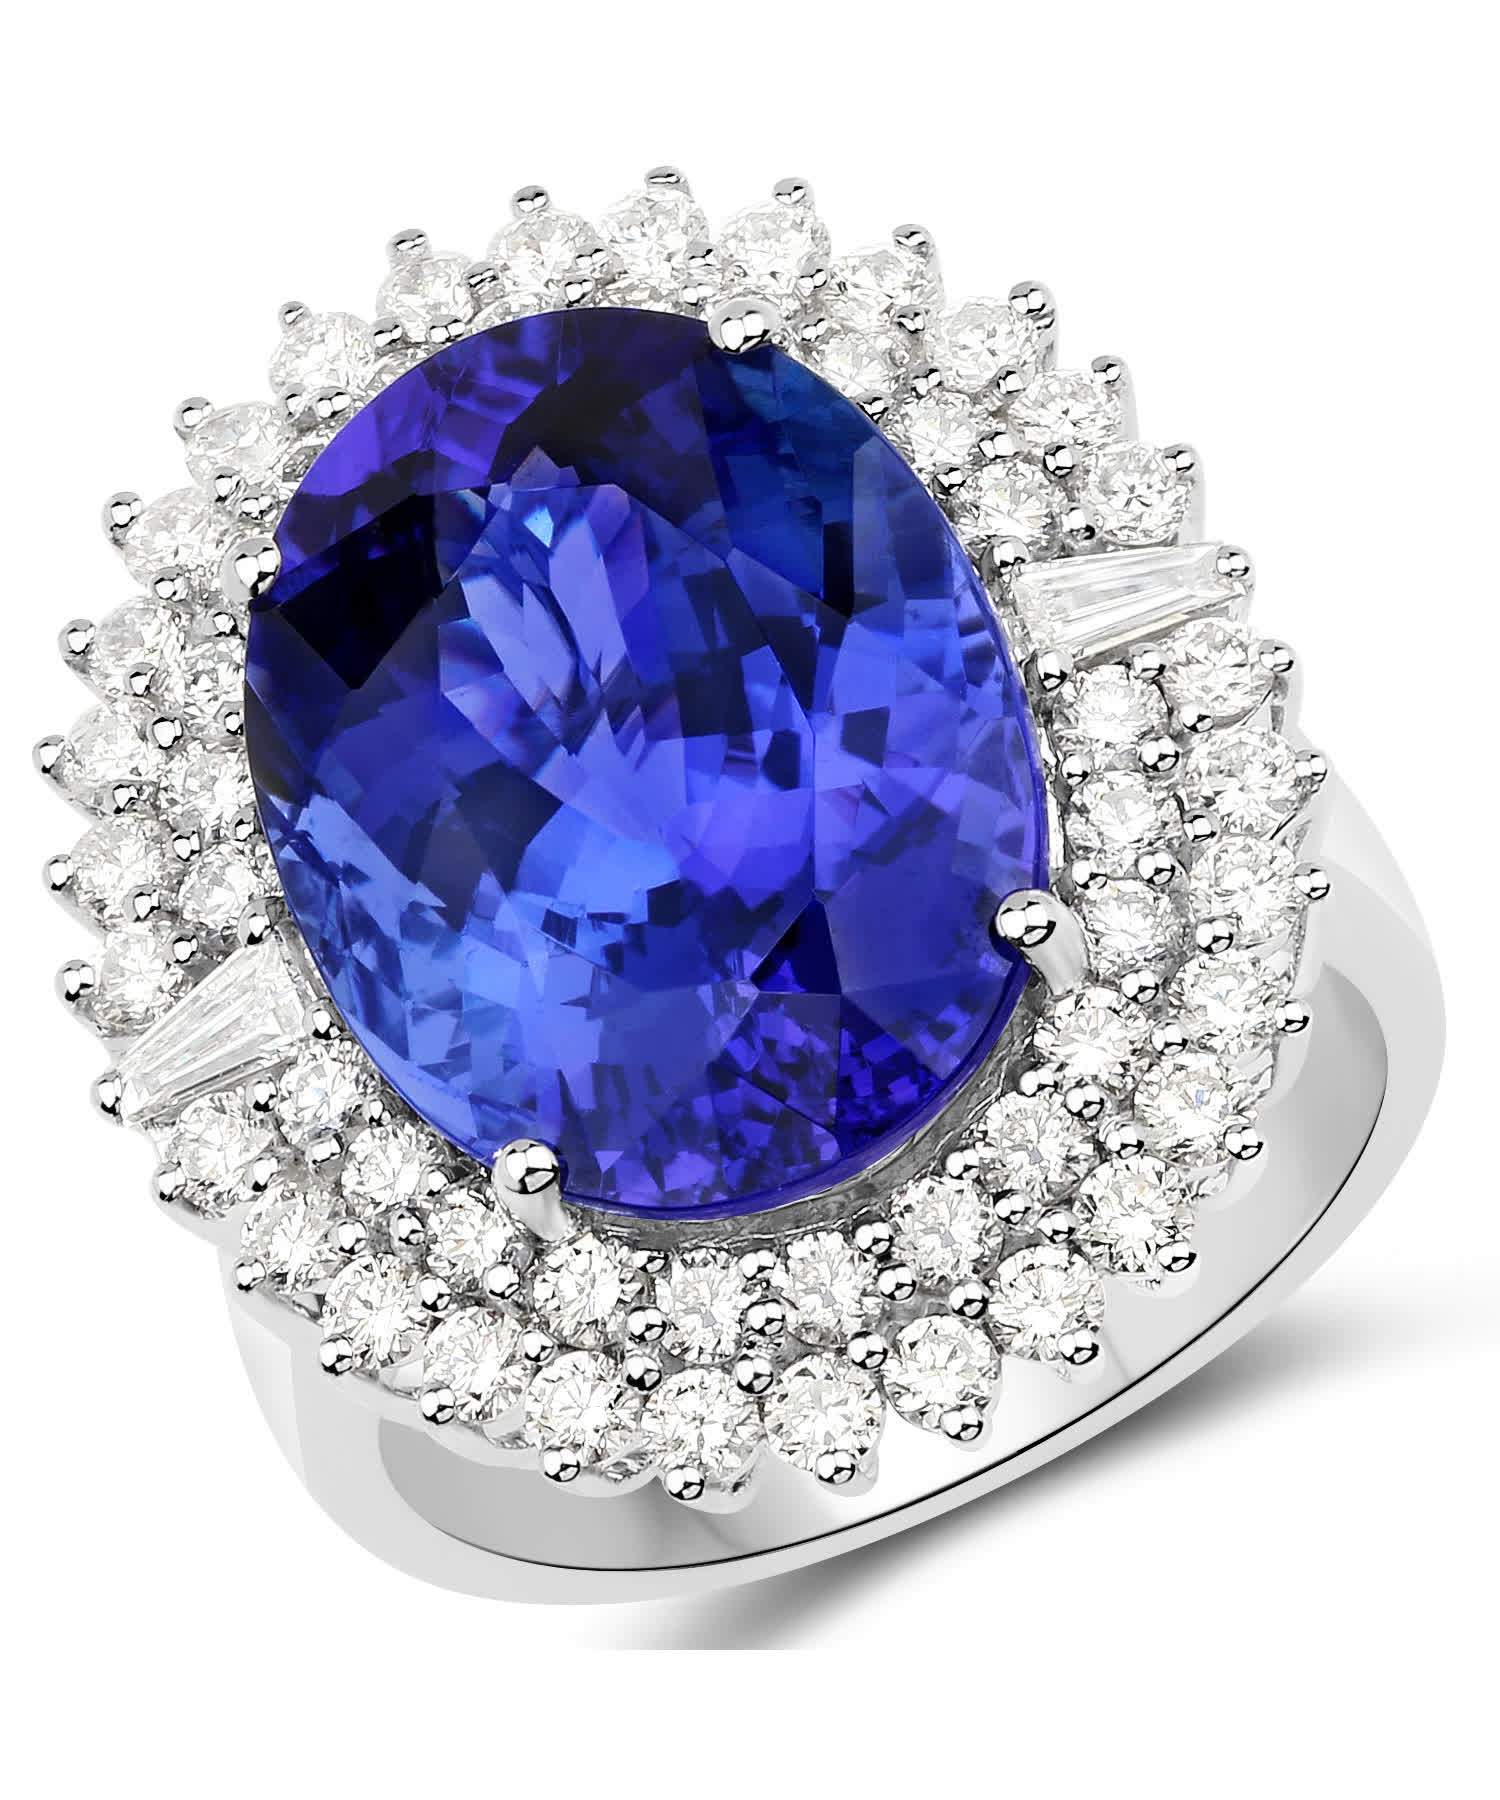 15.77ctw Natural Superior Tanzanite and Diamond 18k Gold Double Halo Cocktail Ring View 1